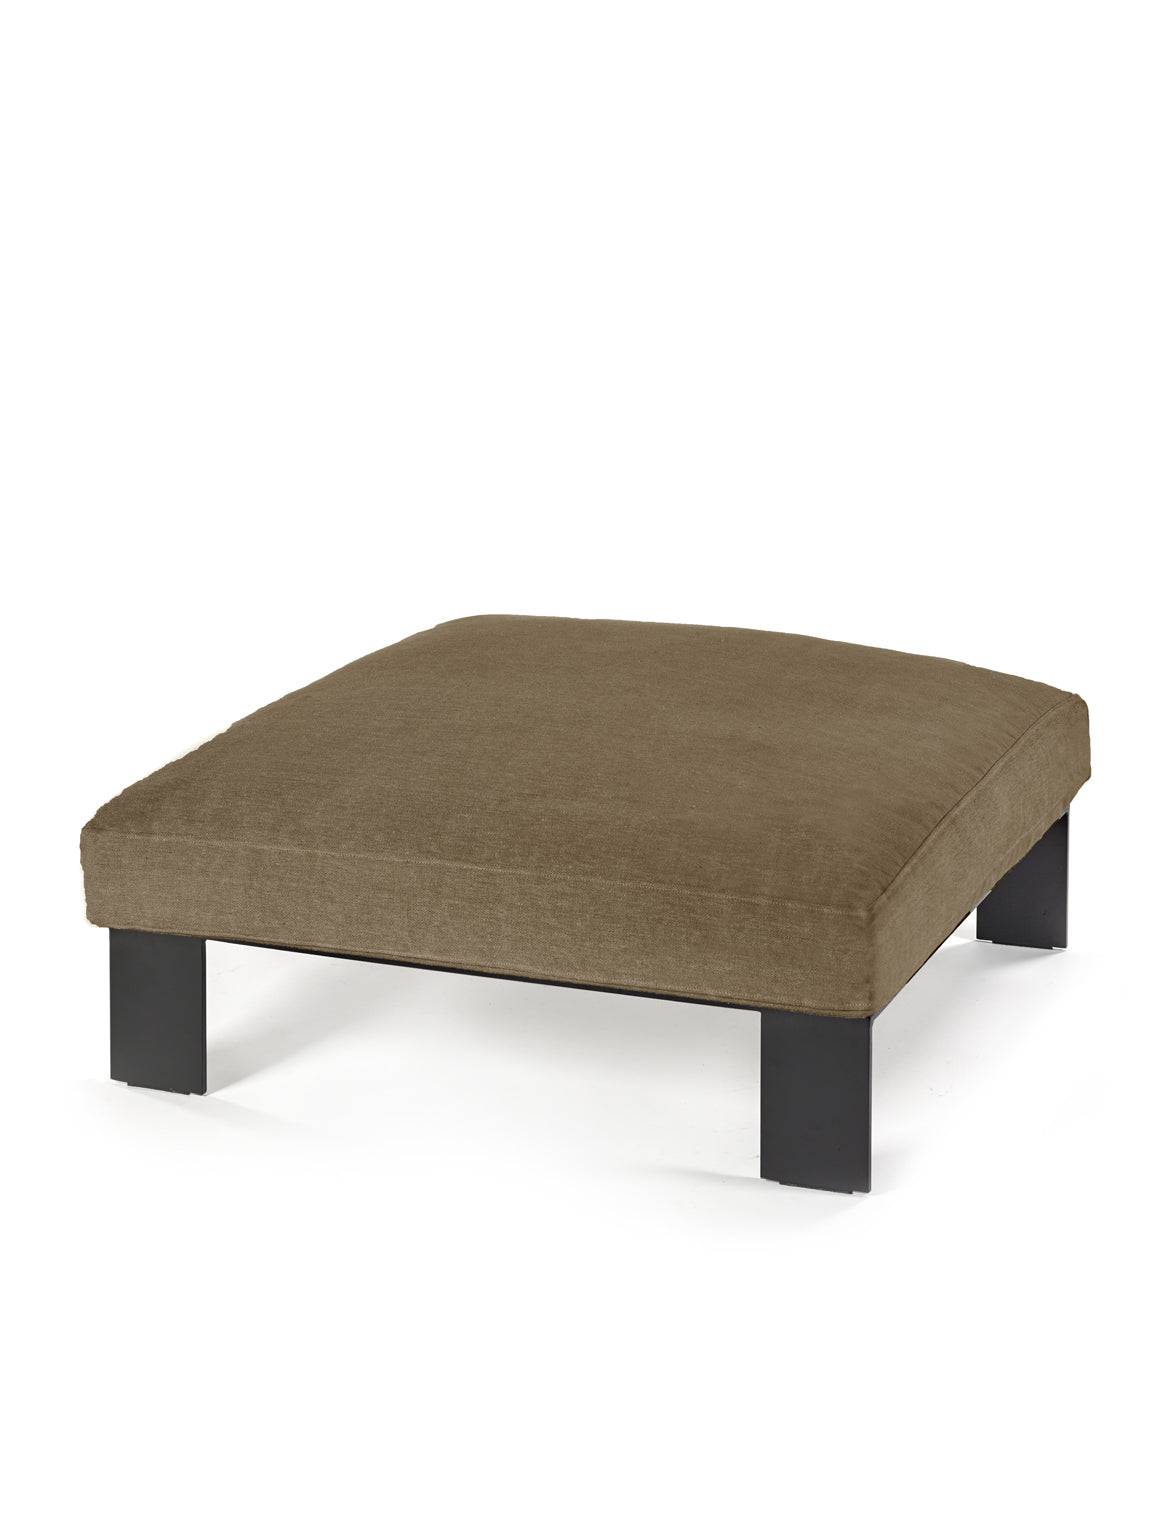 Mombaers Outdoor Ottoman - Camel - THAT COOL LIVING